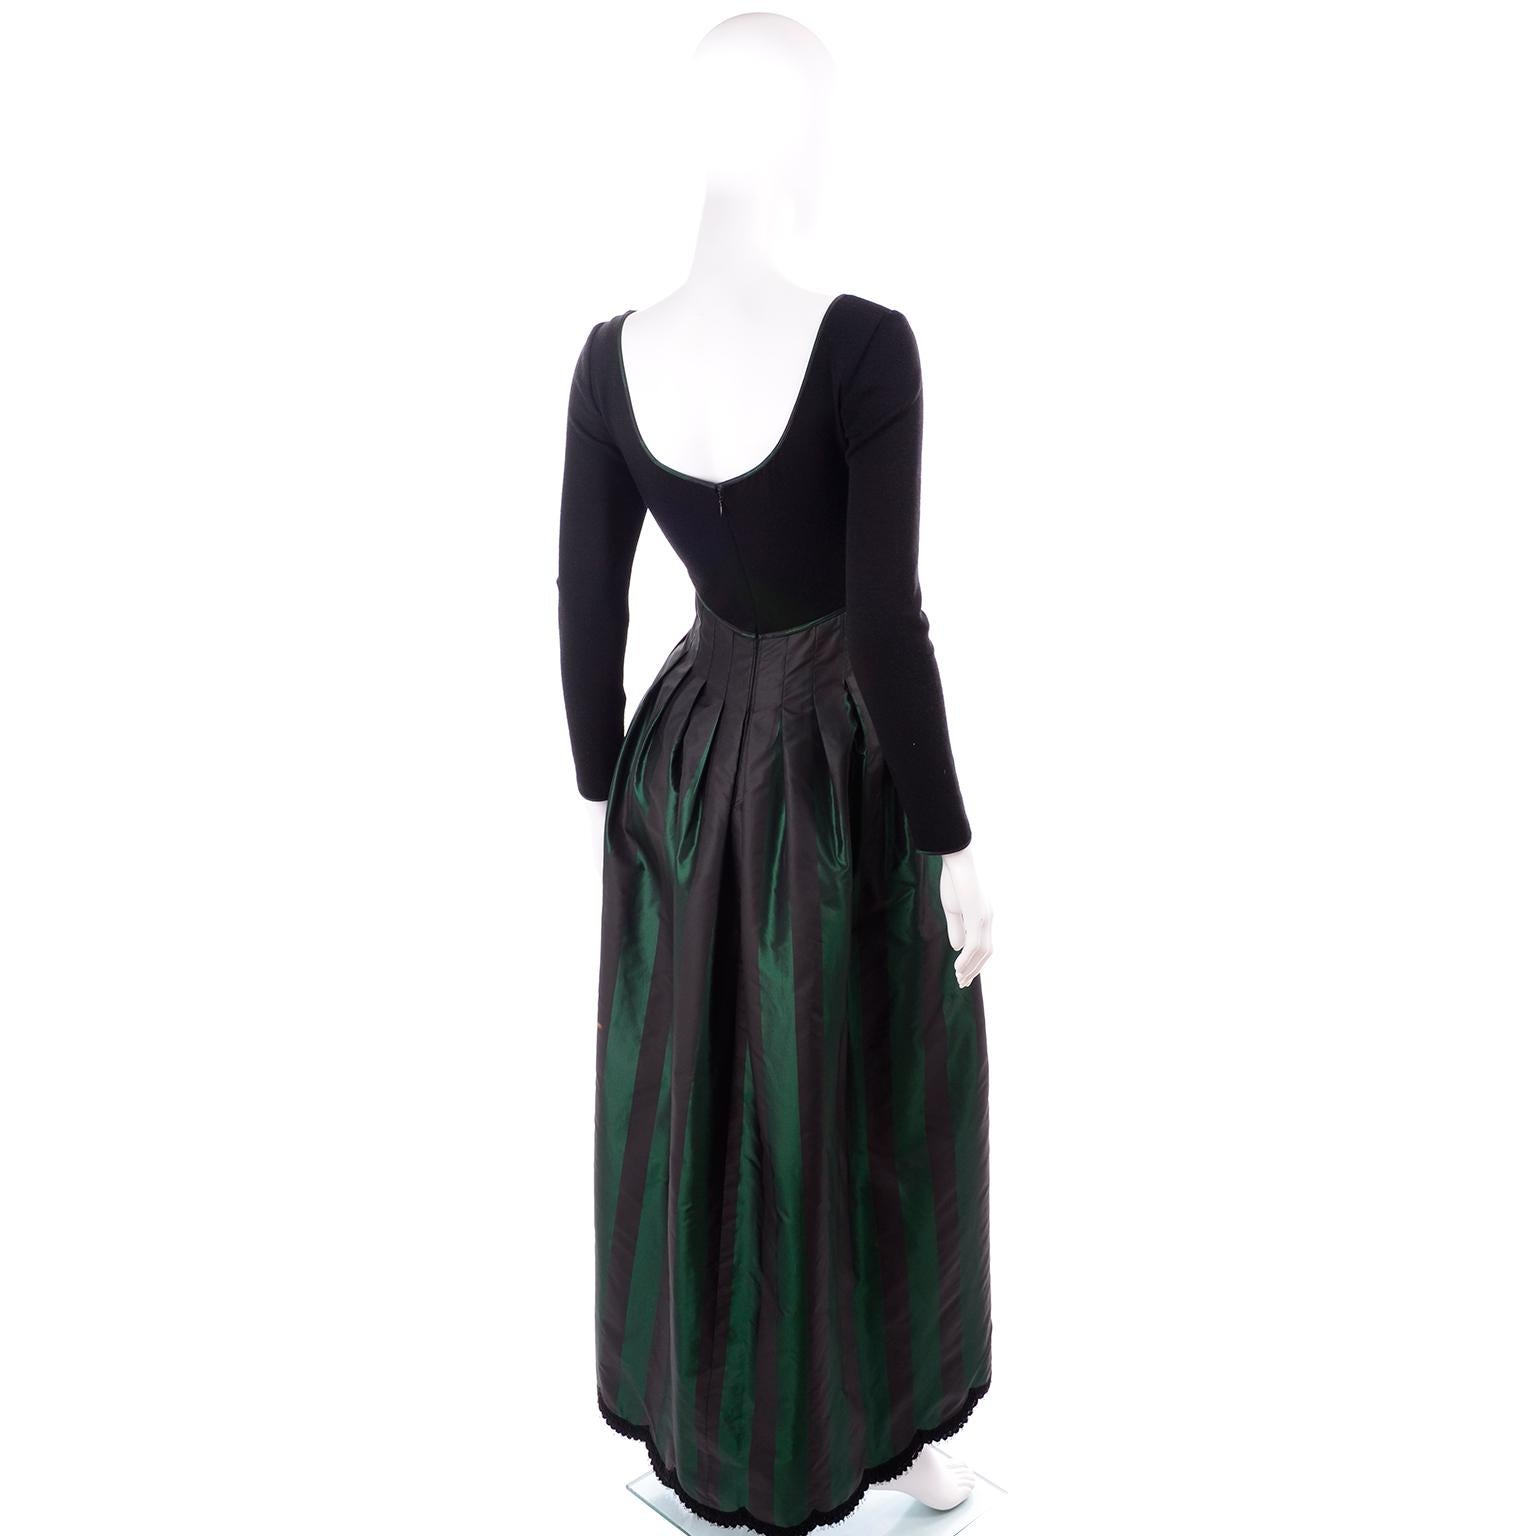 F/W 1989 Geoffrey Beene Black & Iridescent Green Stripe Evening Dress In Excellent Condition For Sale In Portland, OR